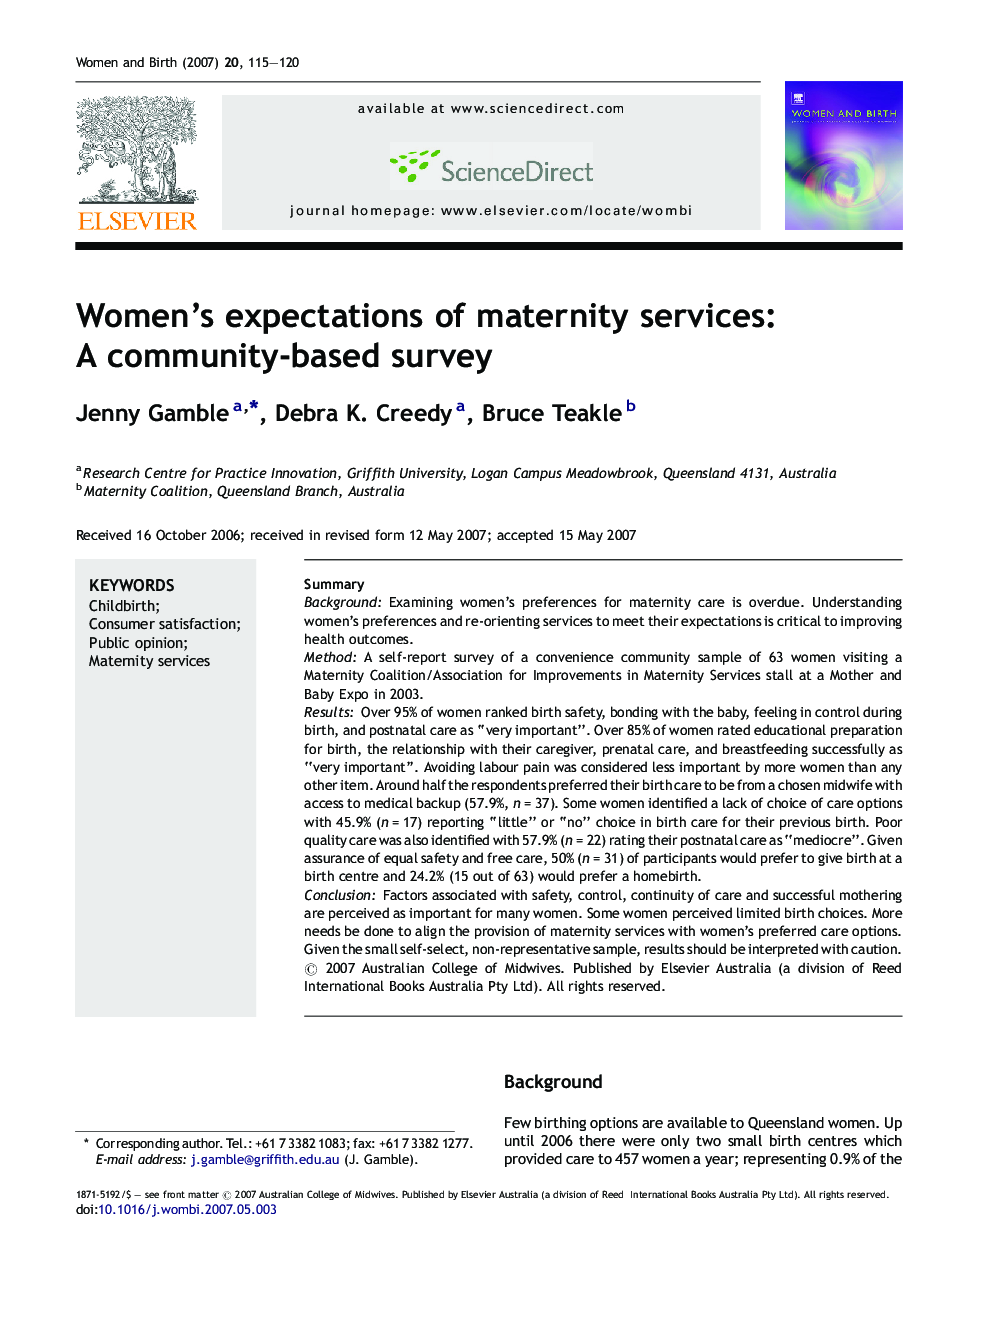 Women's expectations of maternity services: A community-based survey